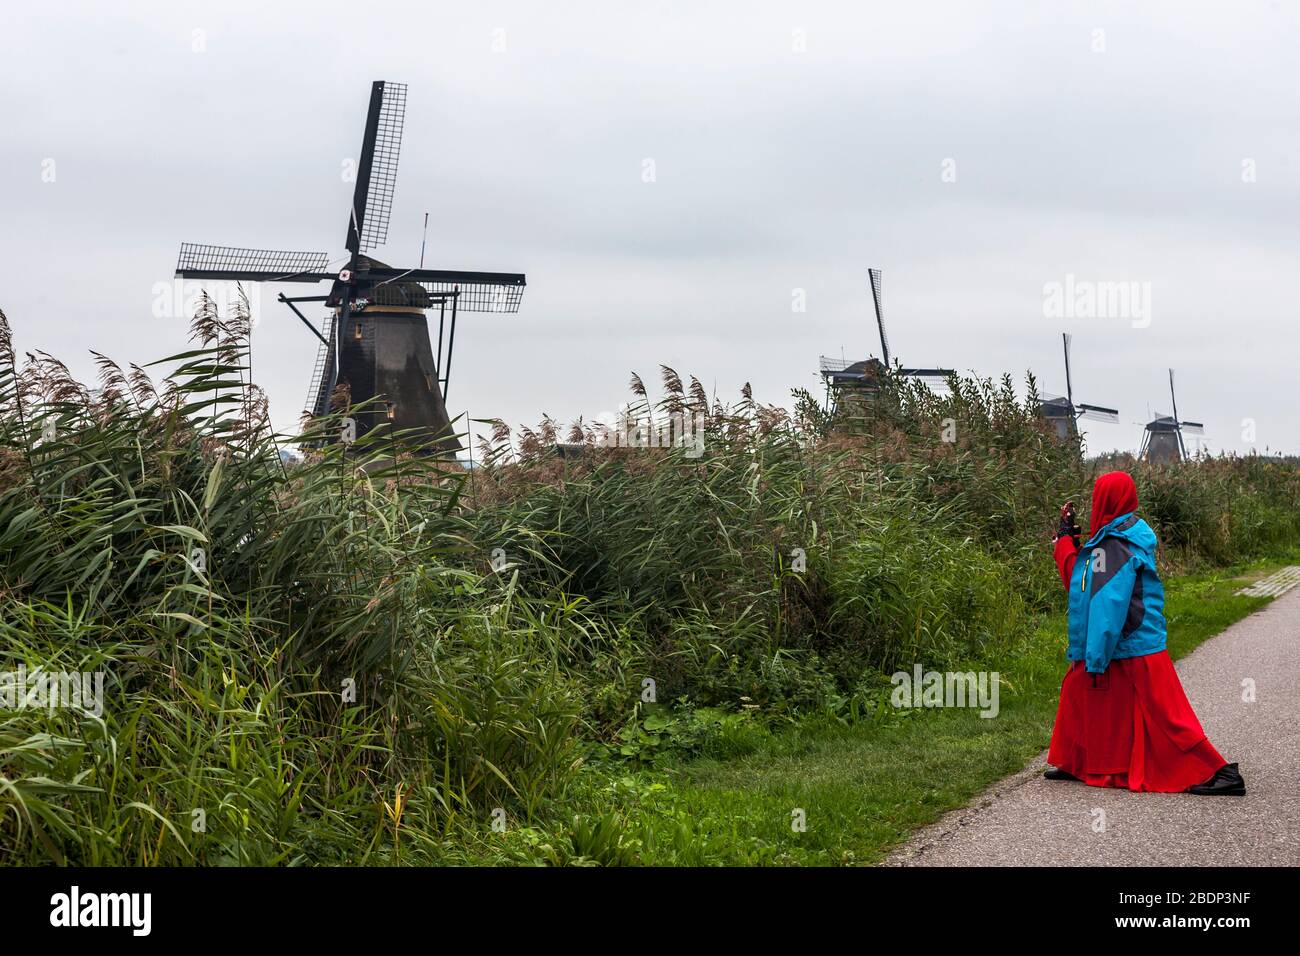 Girl in bright red headscarf and dress photographs the Overwaard windmills, Kindersdijk UNESCO World Heritage Site, South Holland, Netherlands Stock Photo